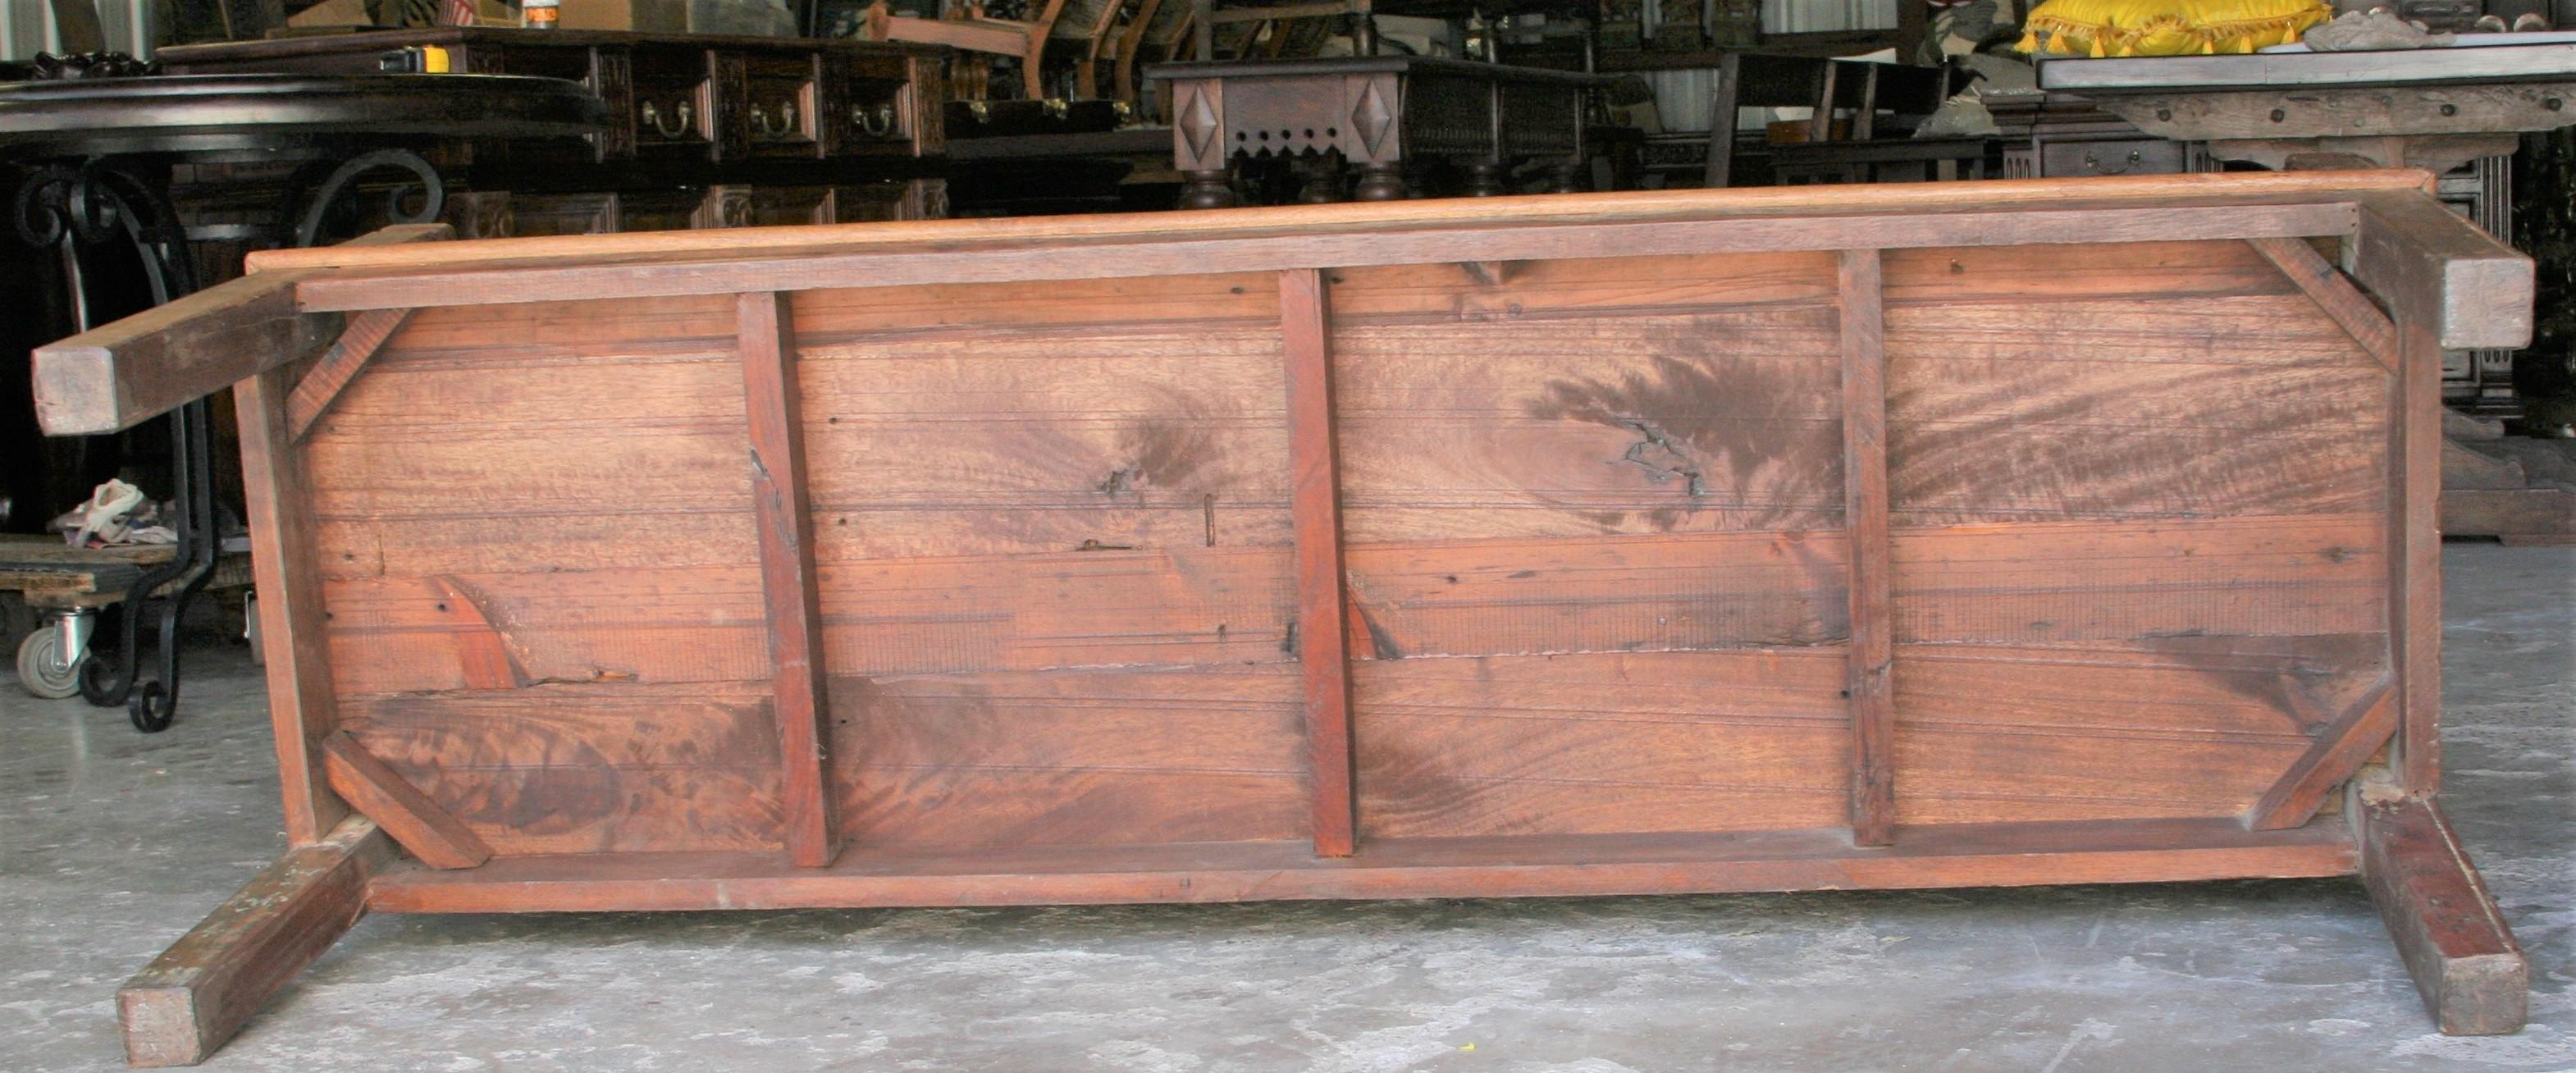 1930s Solid Teak Wood Robustly Constructed Bench from Dutch Colonial Farm In Good Condition For Sale In Houston, TX